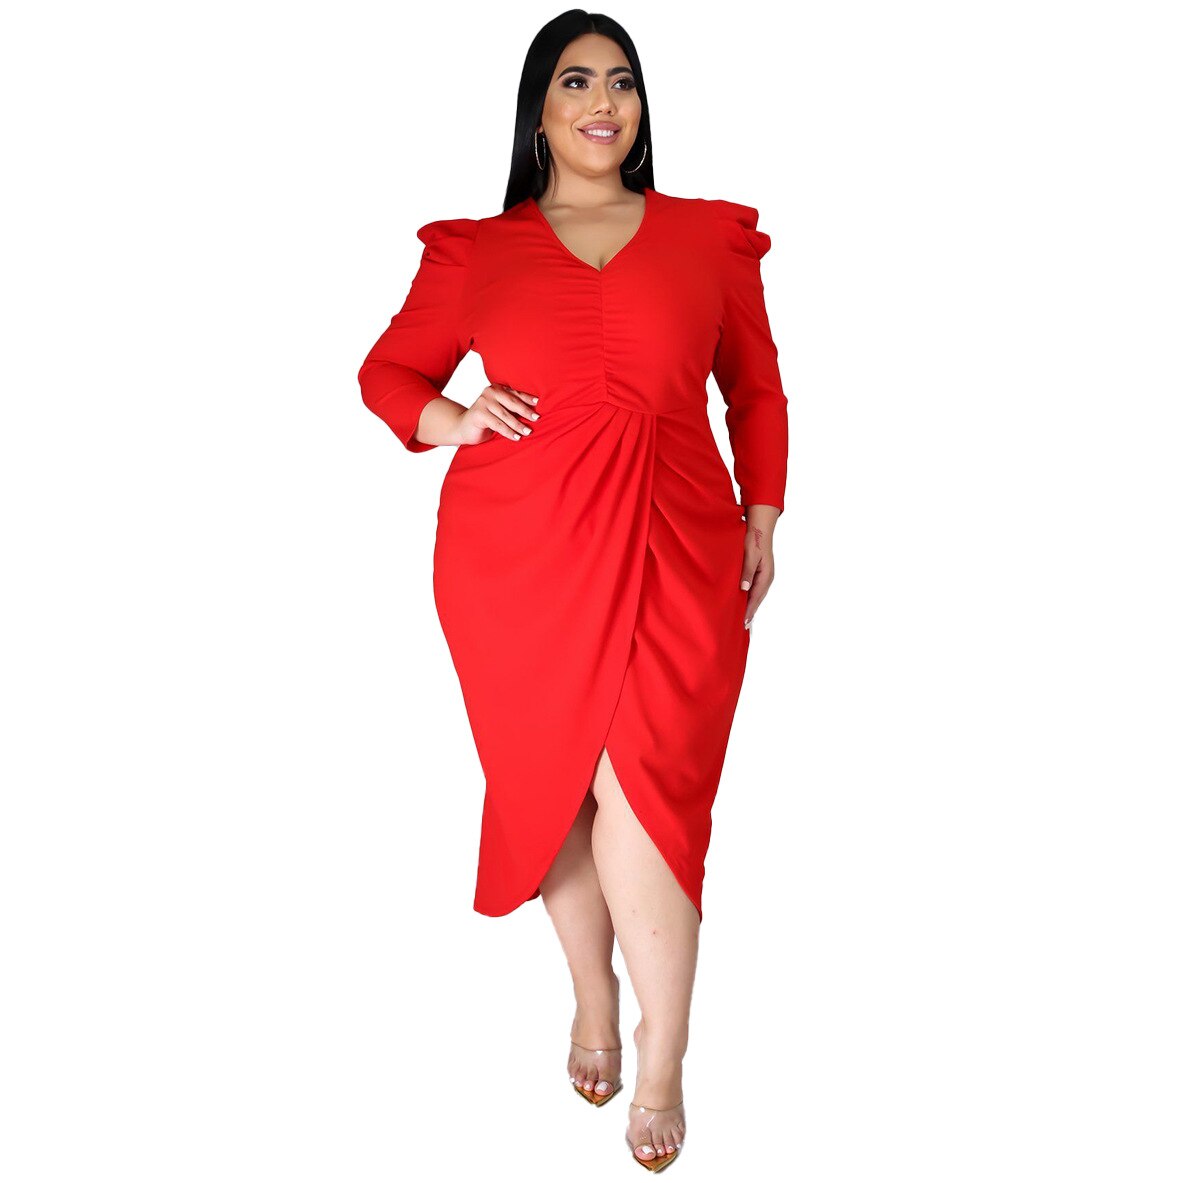 Aovica Plus Size Elegant Fashion Dress For Women Autumn Puff Sleeve Pleated Bodycon Split Mid Vestidos Night Party Robes Office Lady